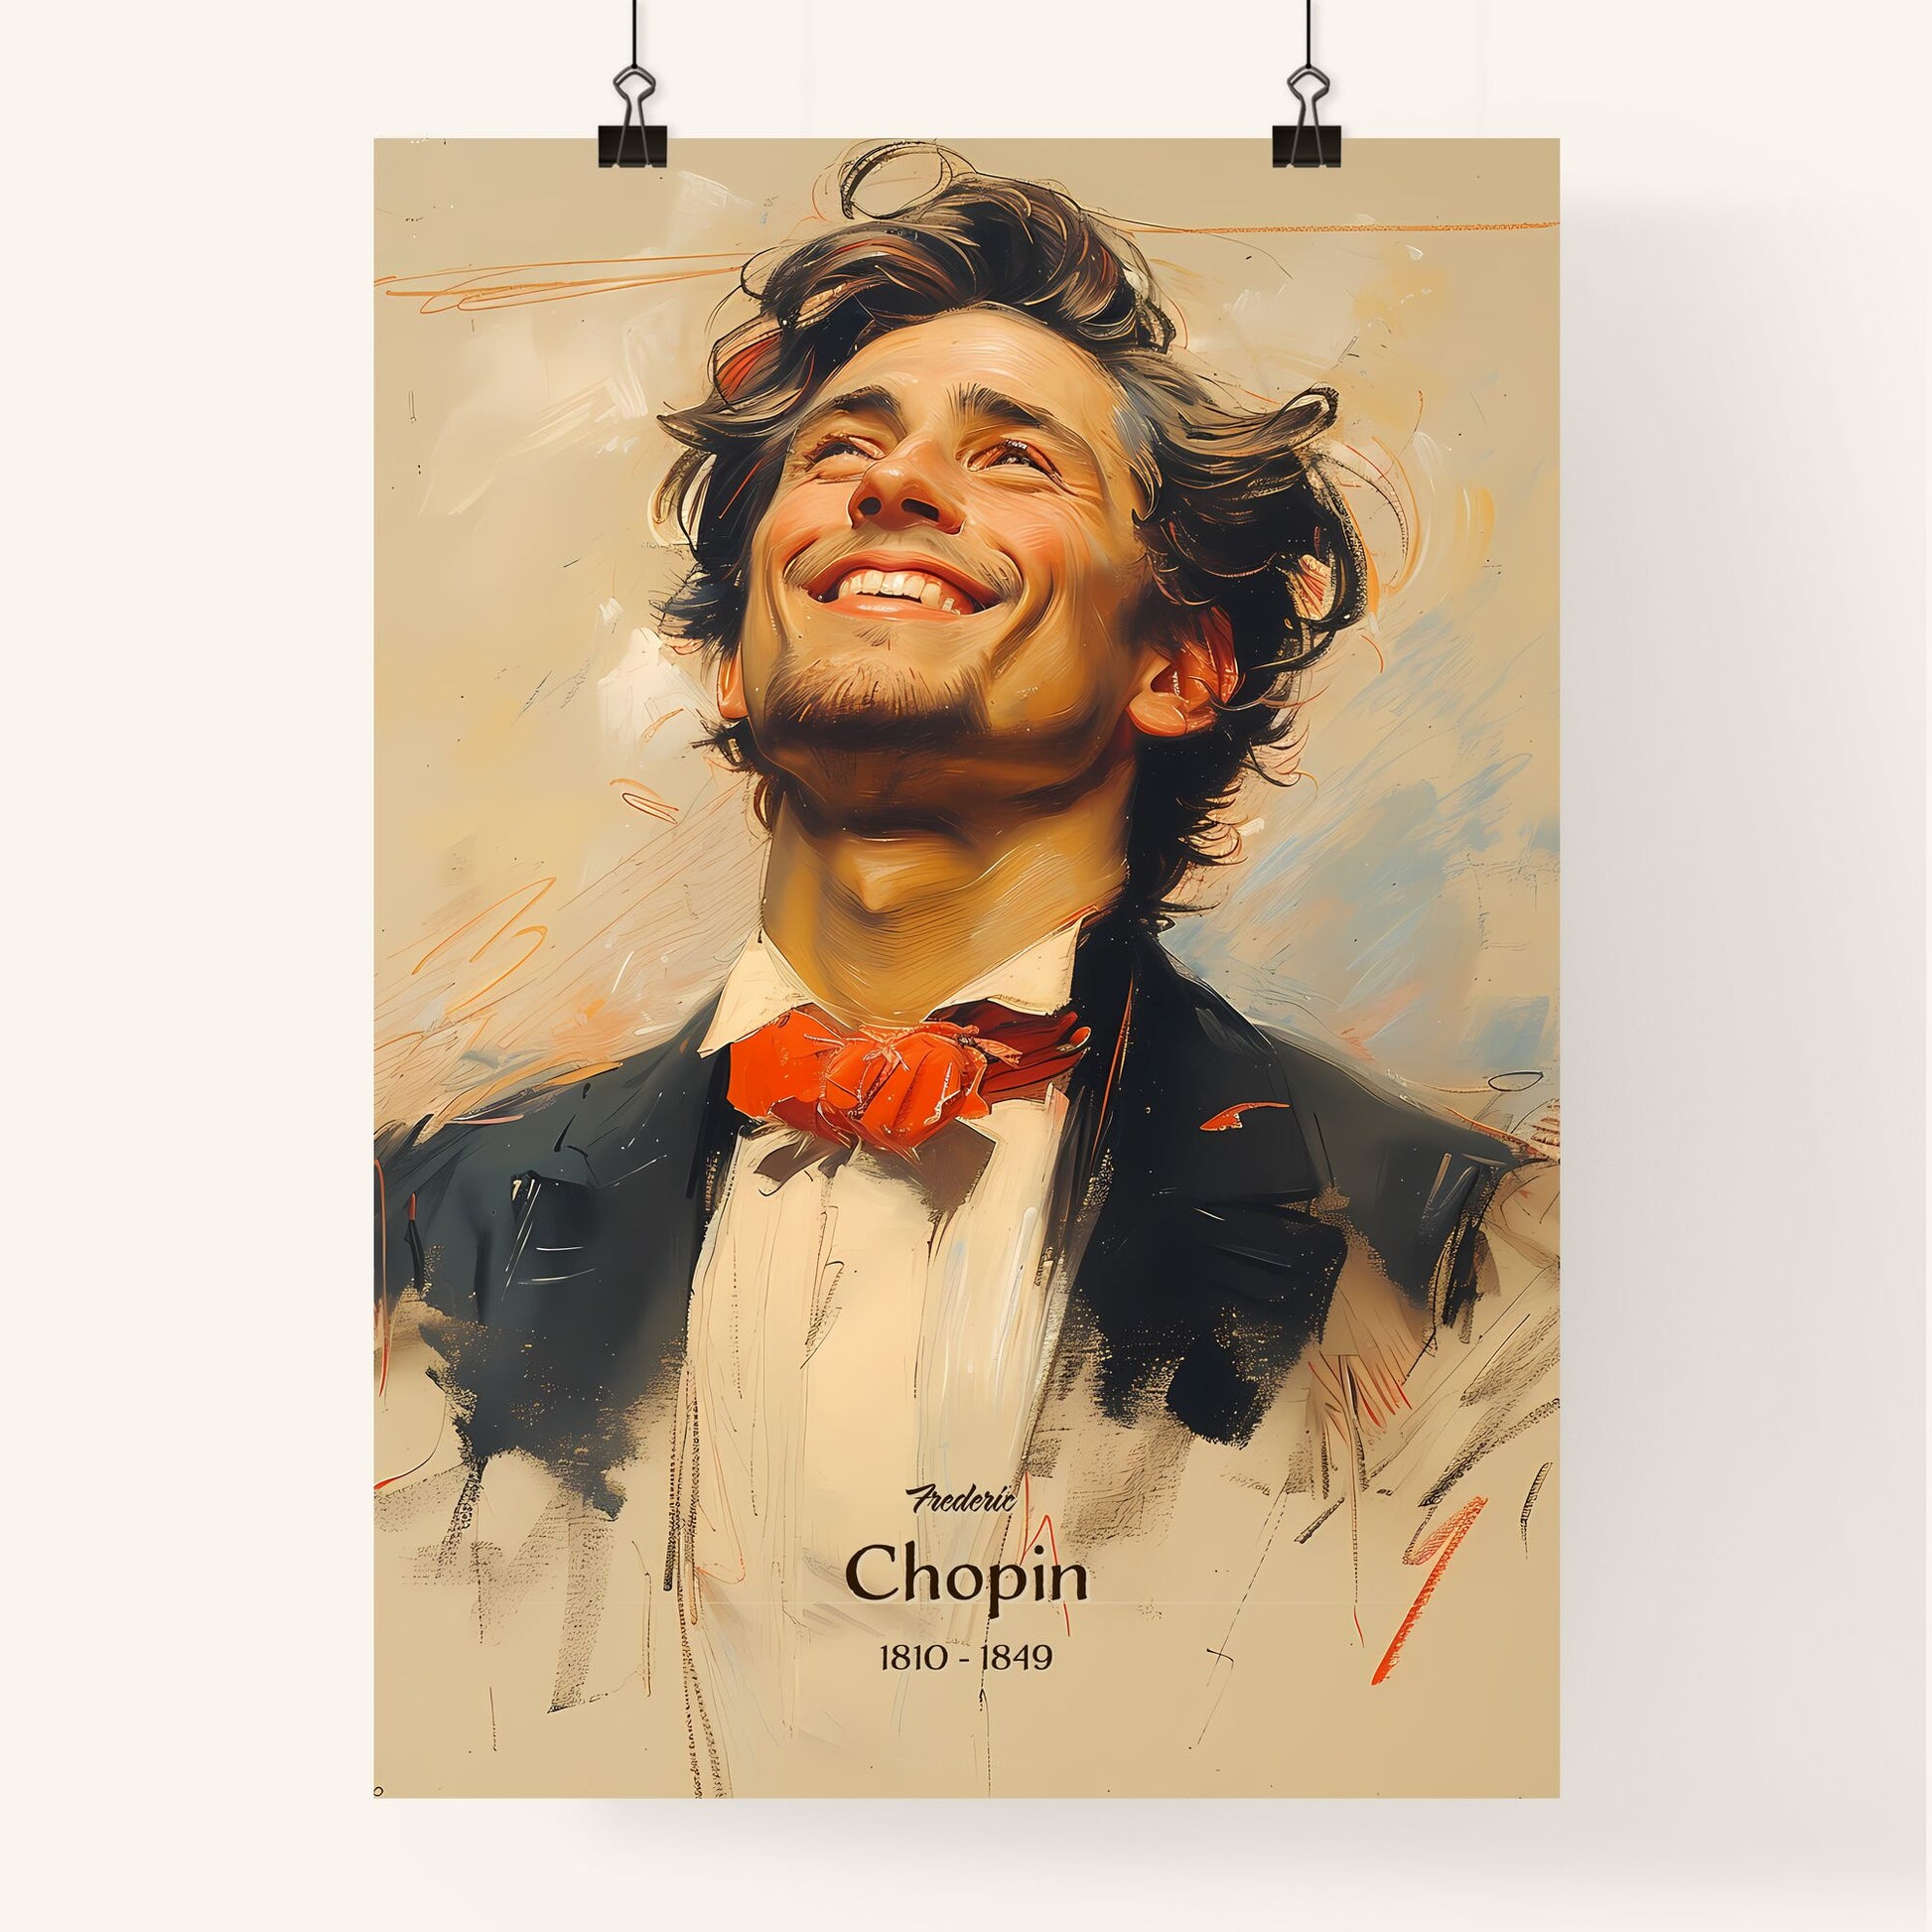 Frederic, Chopin, 1810 - 1849, A Poster of a man in a tuxedo smiling Default Title